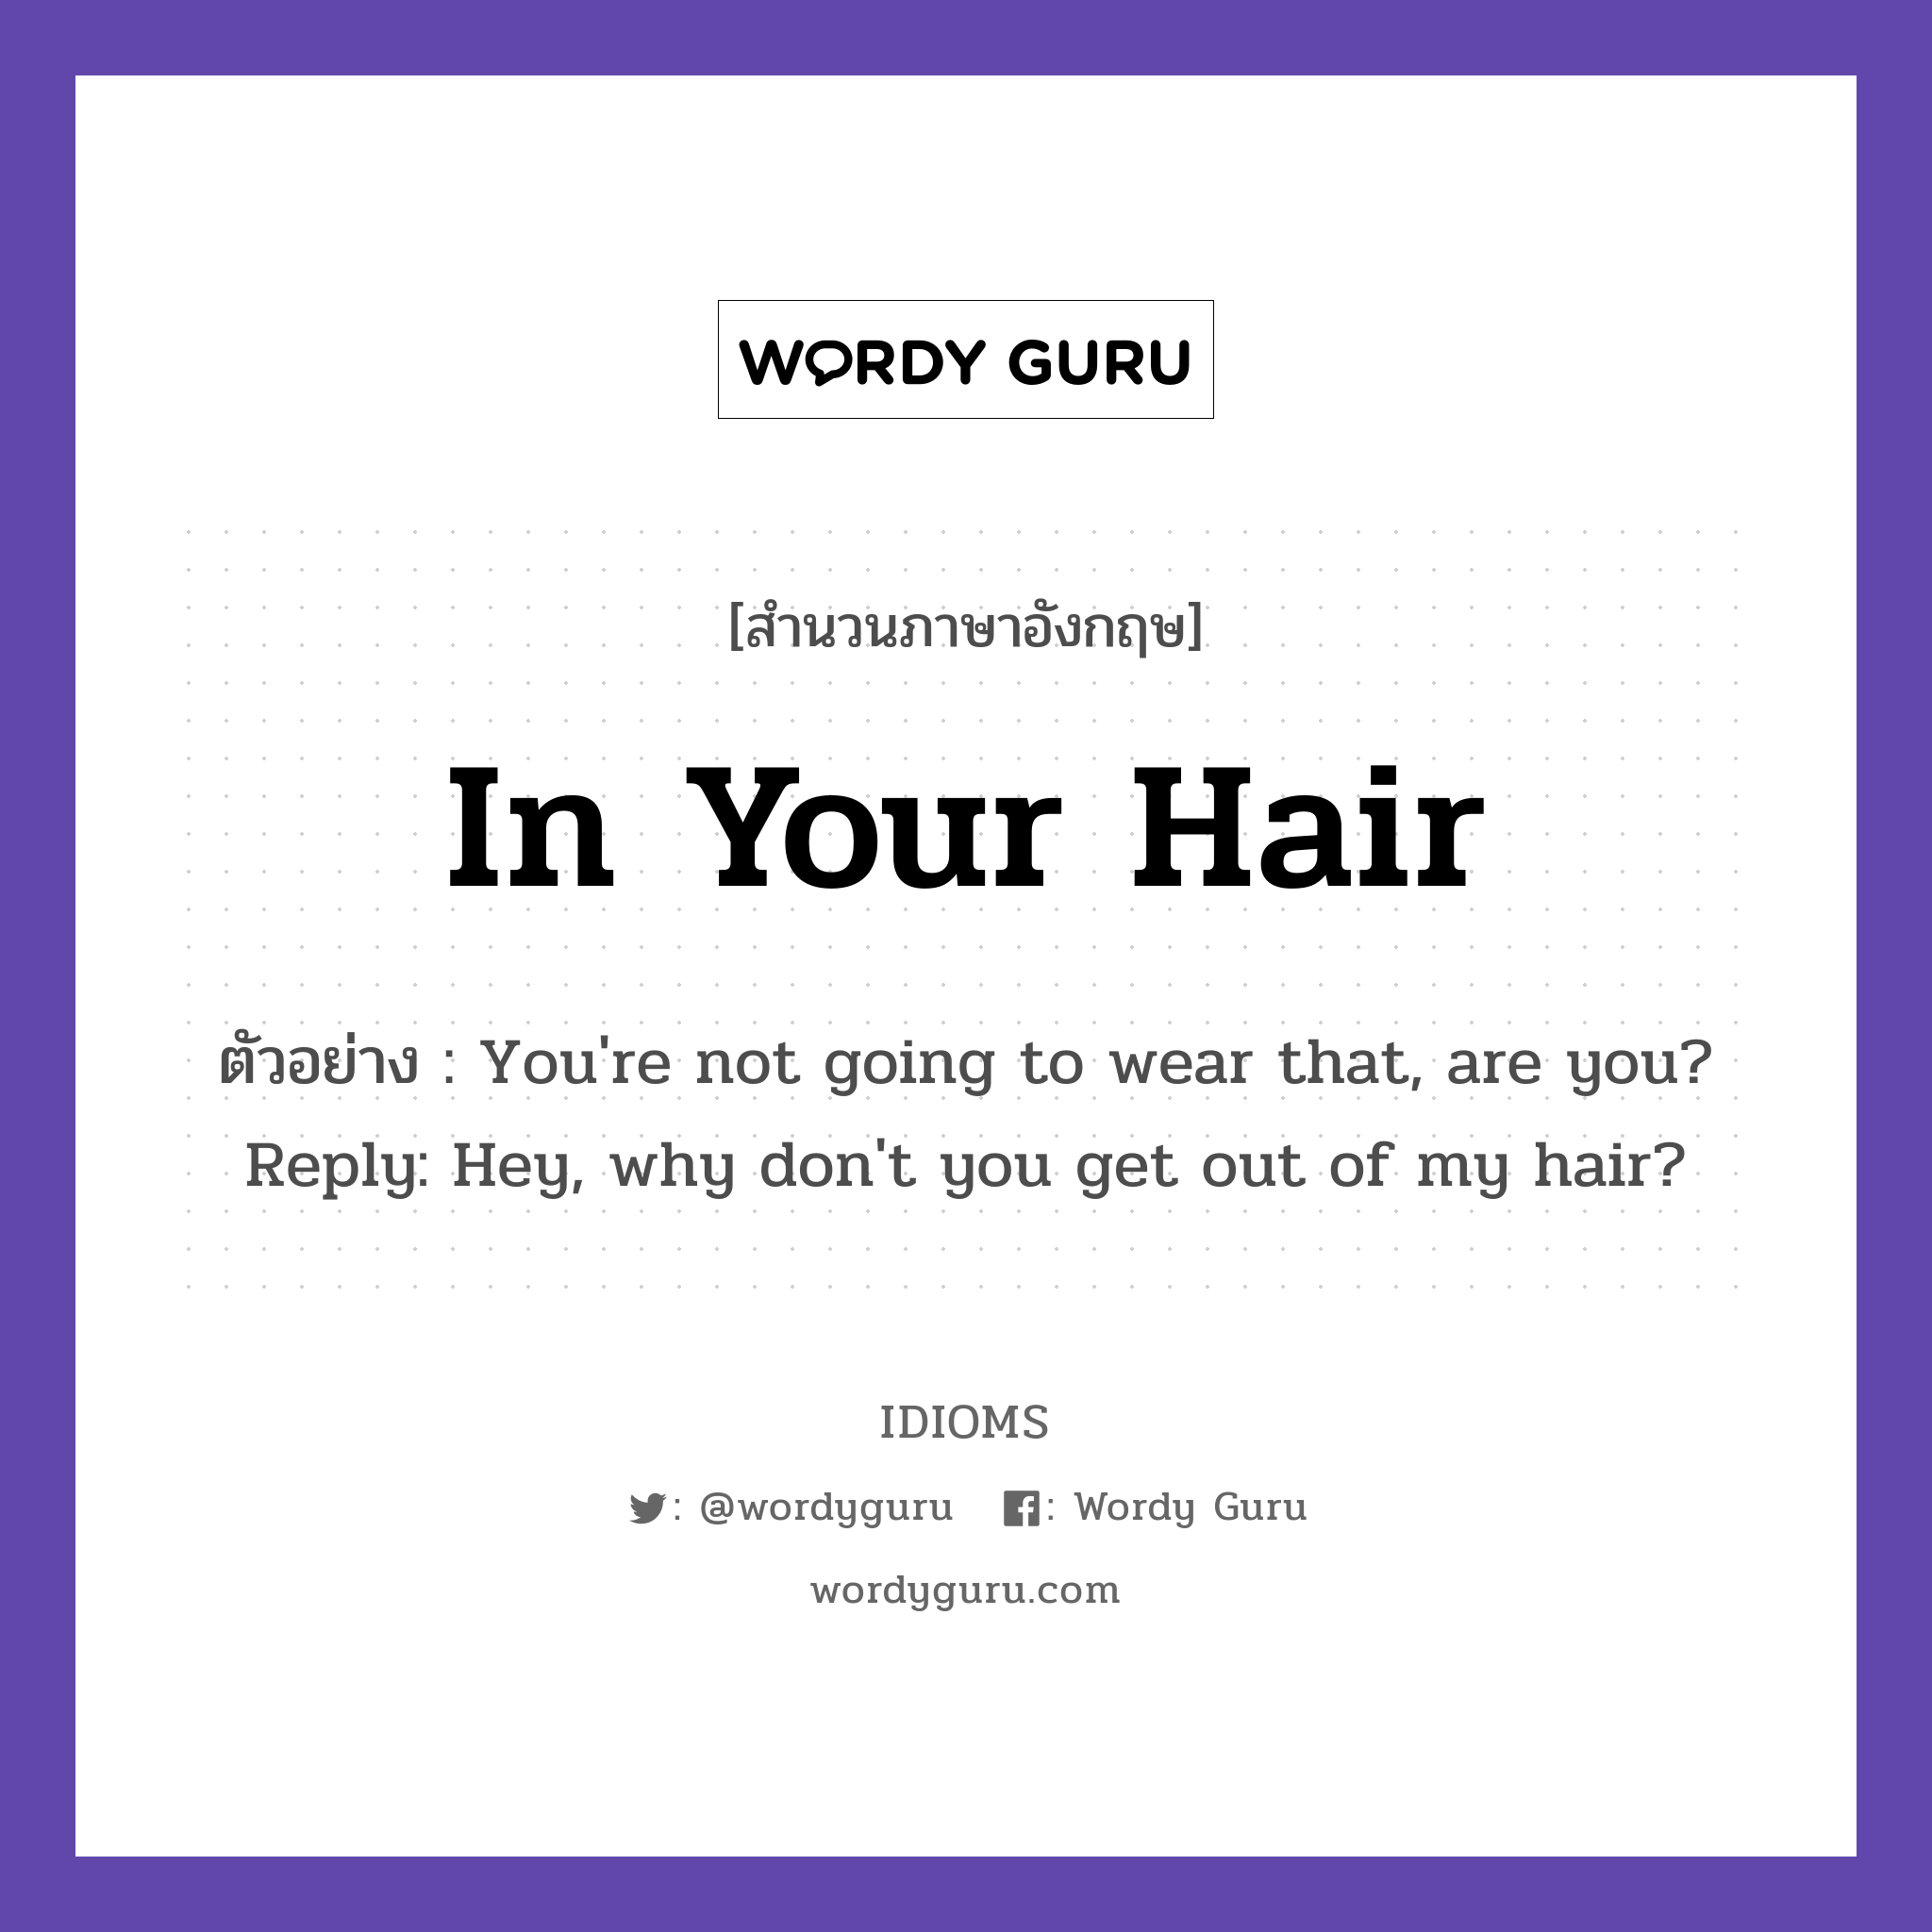 In Your Hair แปลว่า?, สำนวนภาษาอังกฤษ In Your Hair ตัวอย่าง You're not going to wear that, are you? Reply: Hey, why don't you get out of my hair?